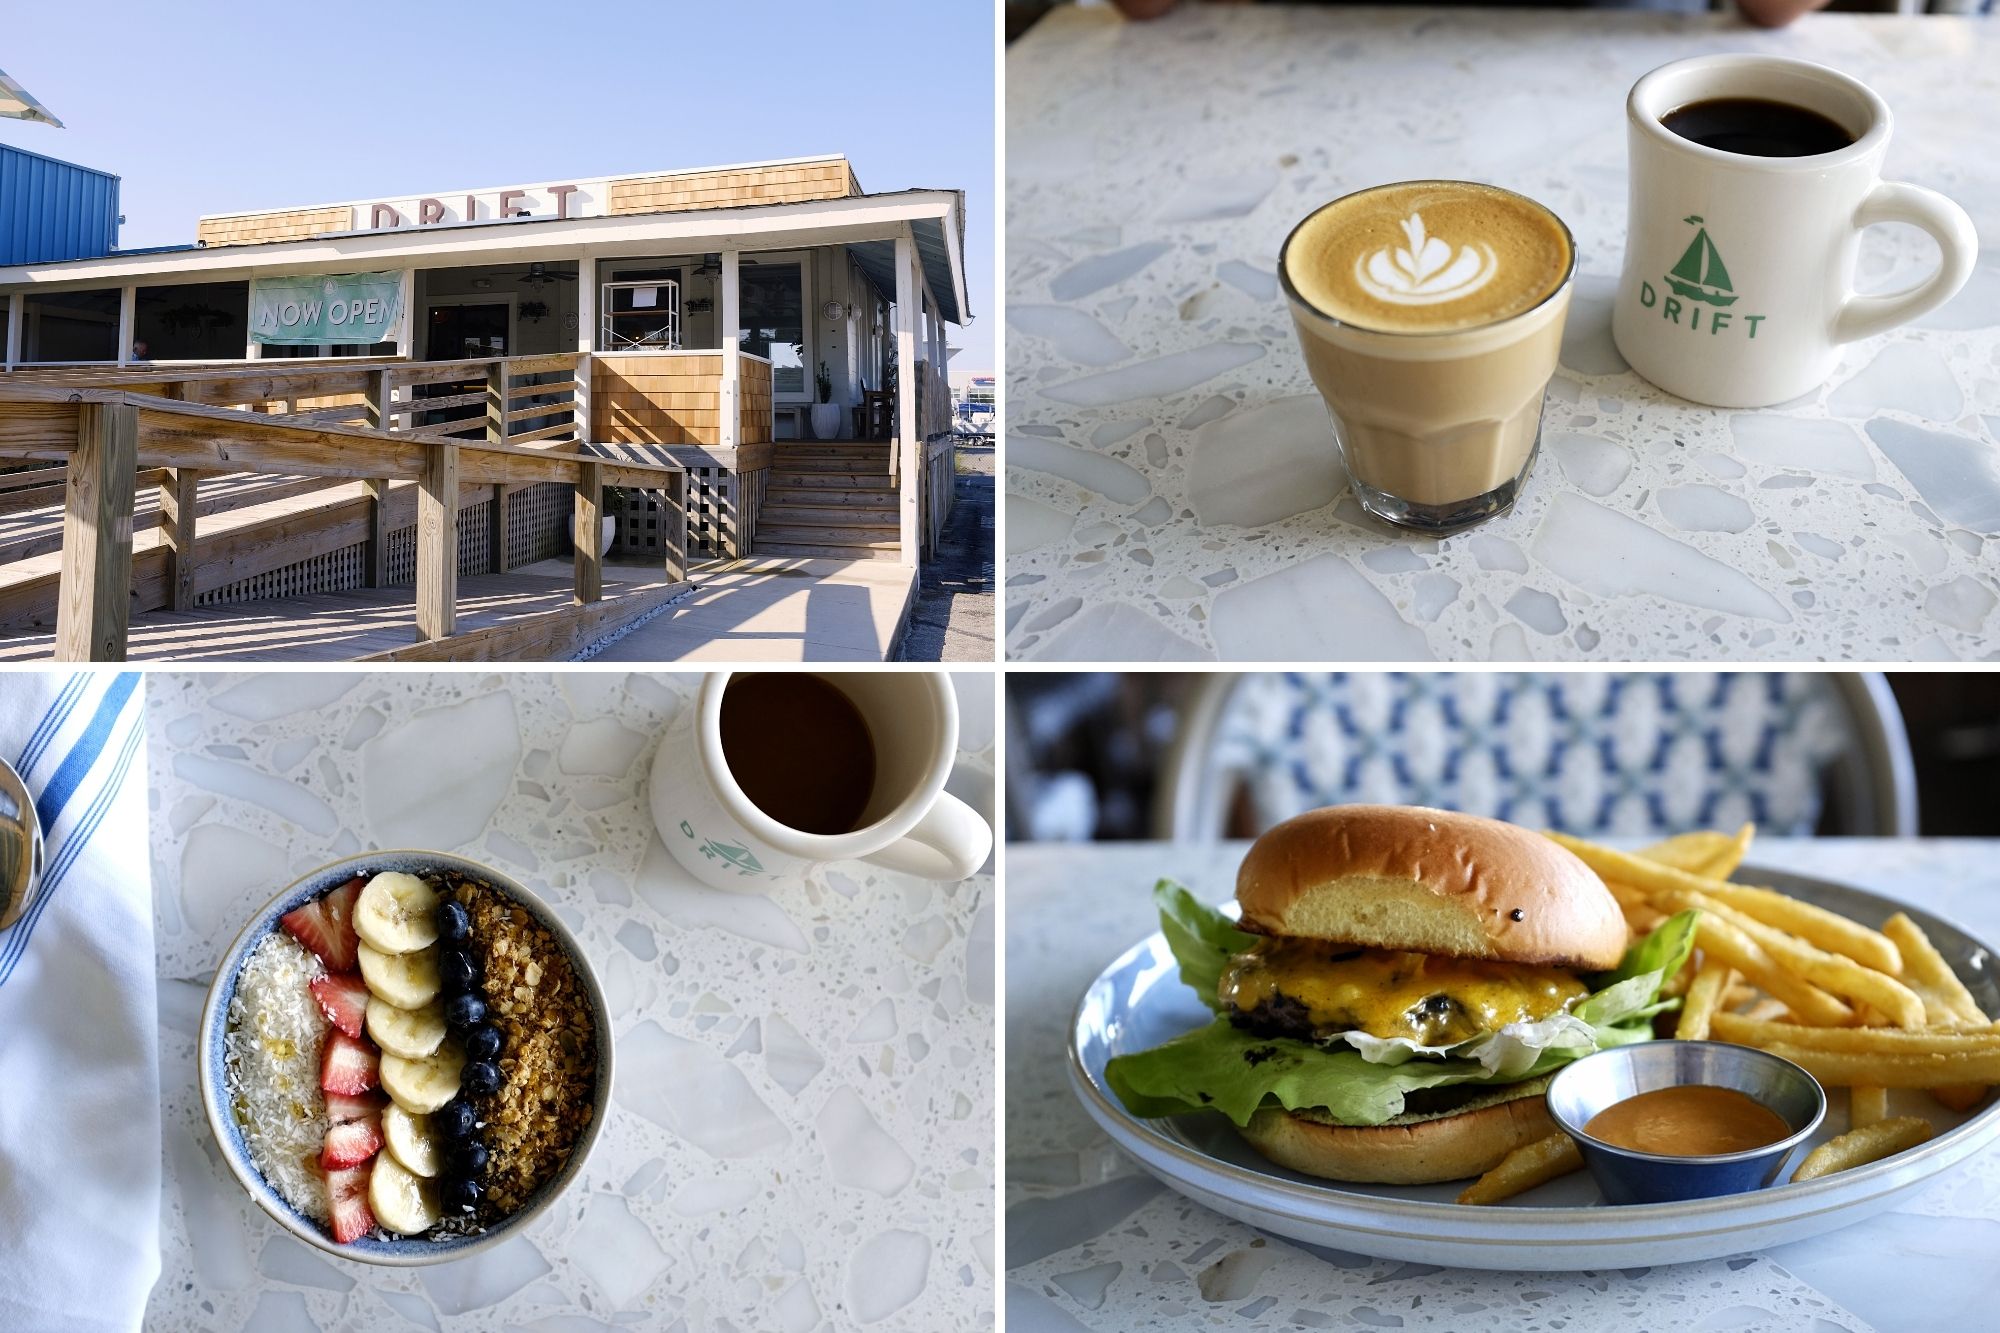 Collage: Exterior of Drift Cafe, Coffee cups, acai bowl, and burger